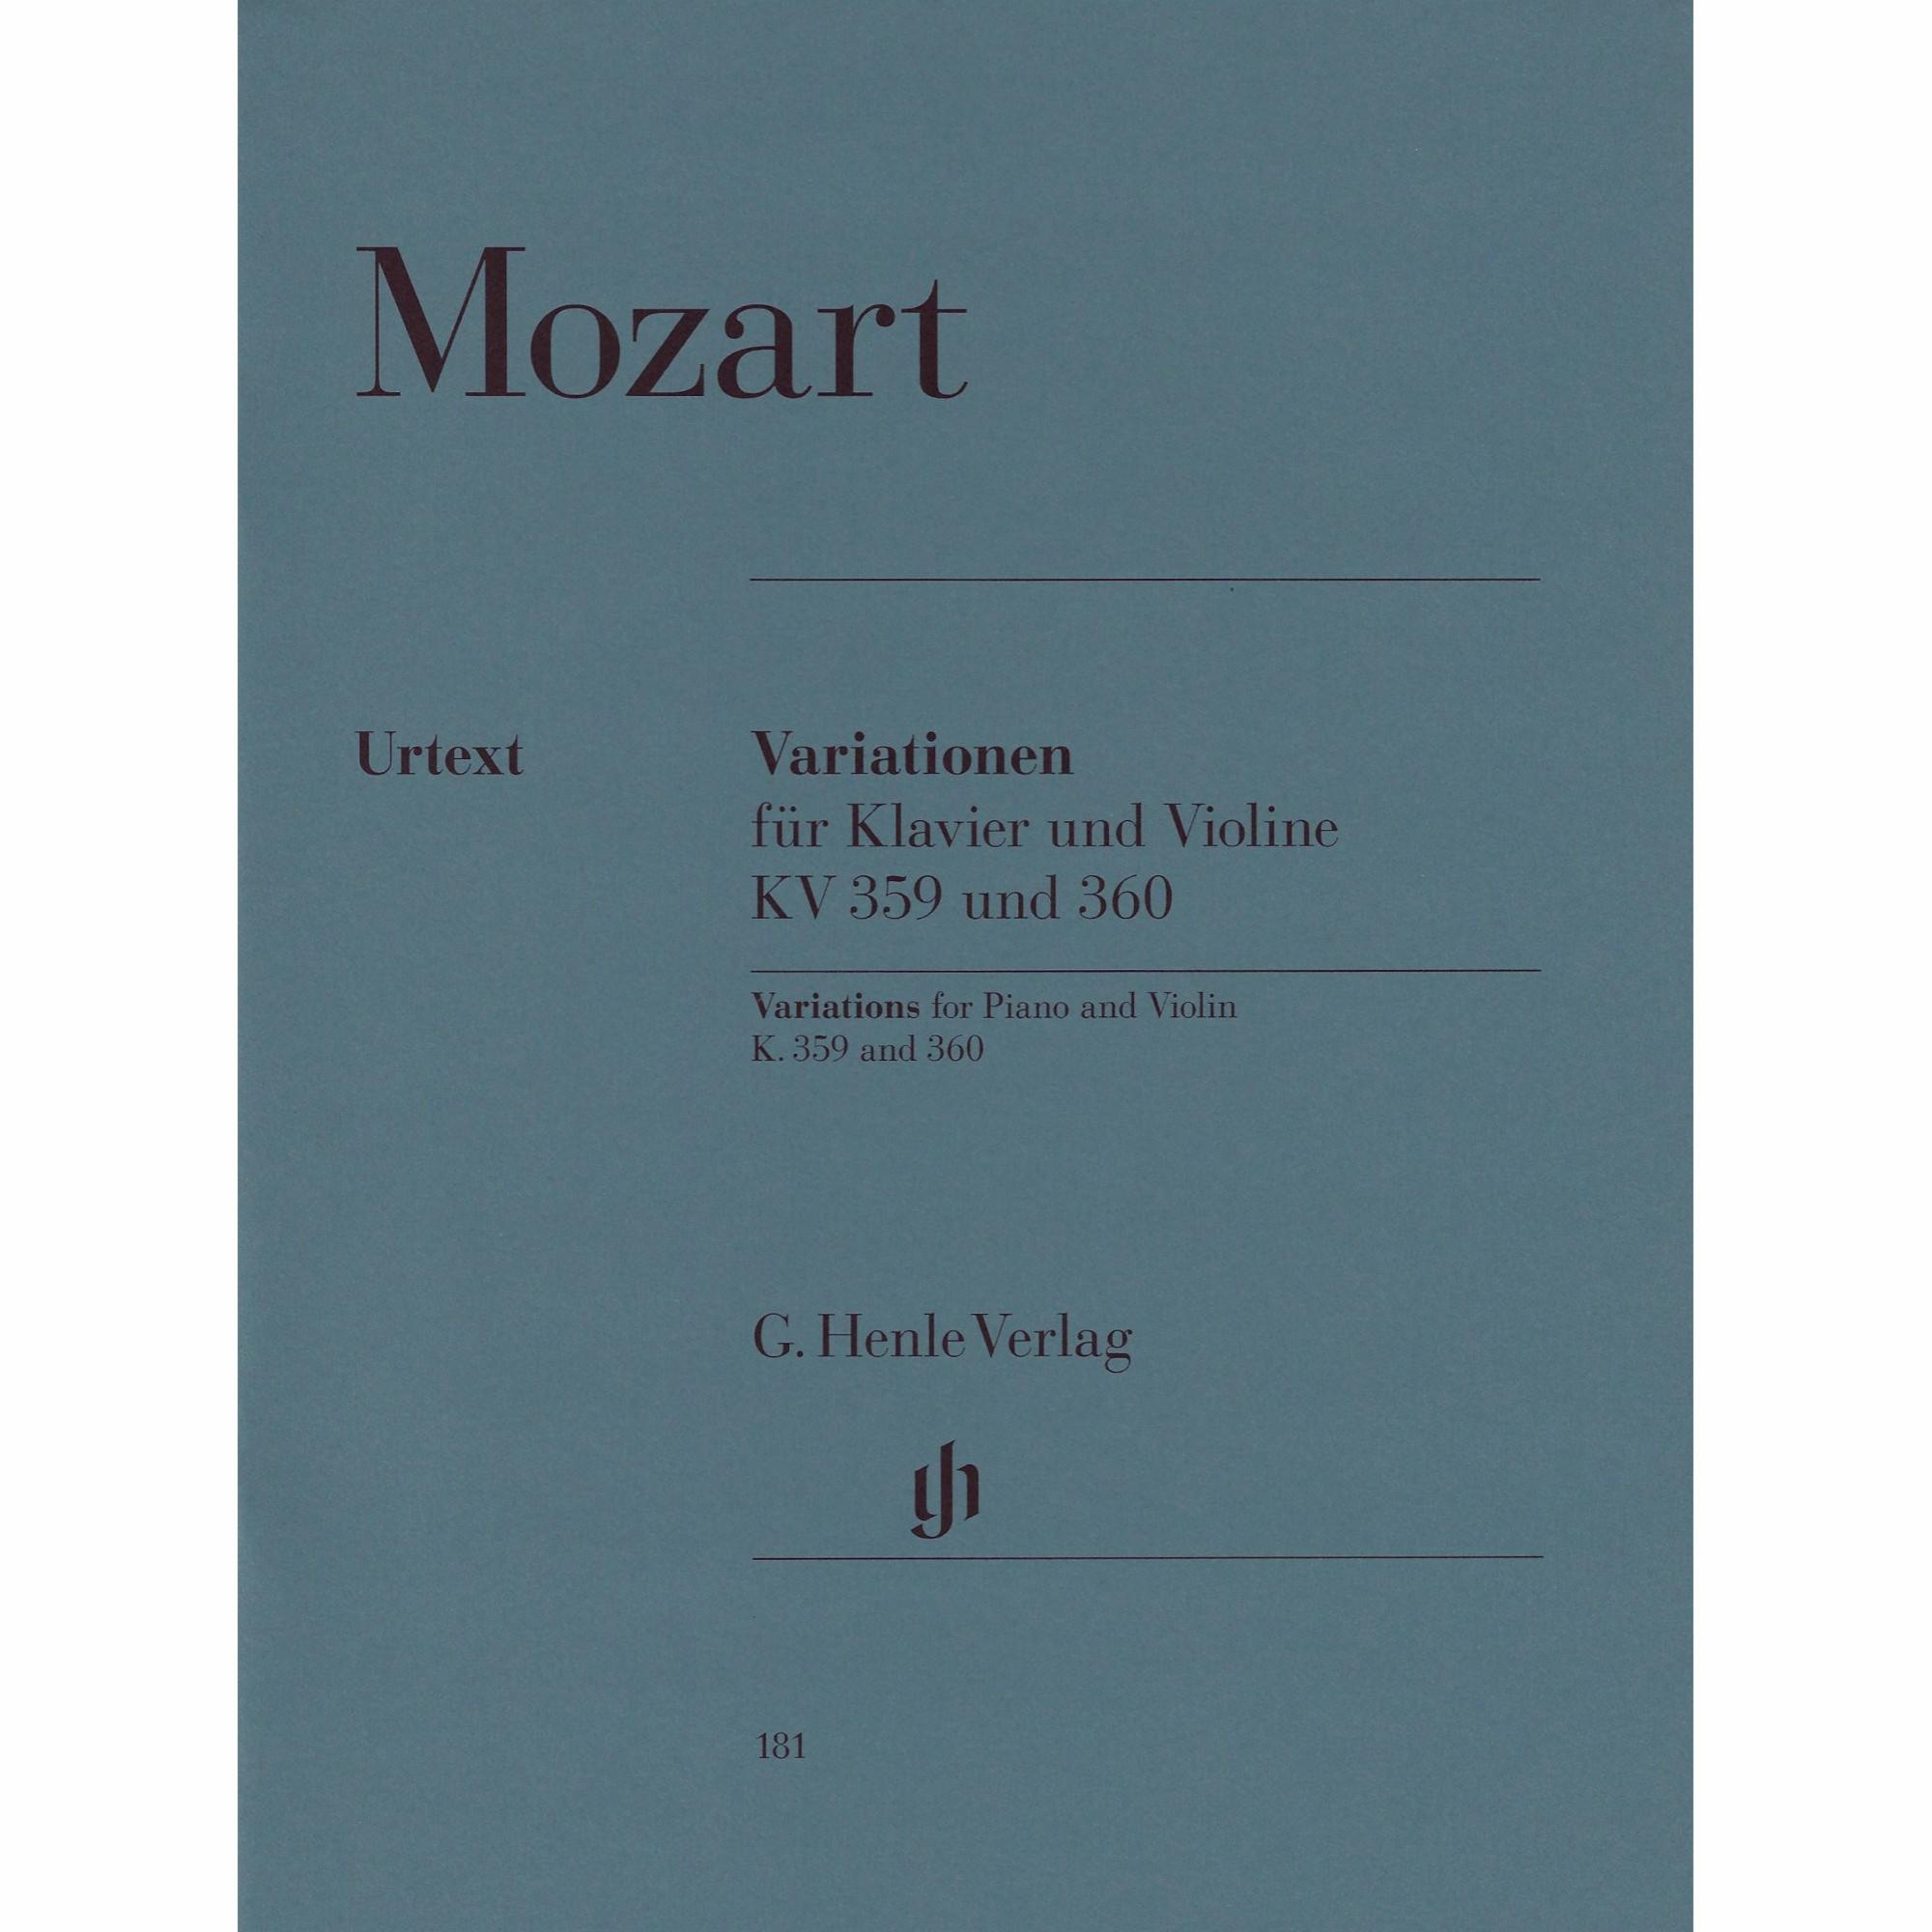 Mozart -- Variations, K. 359 & 360 for Violin and Piano